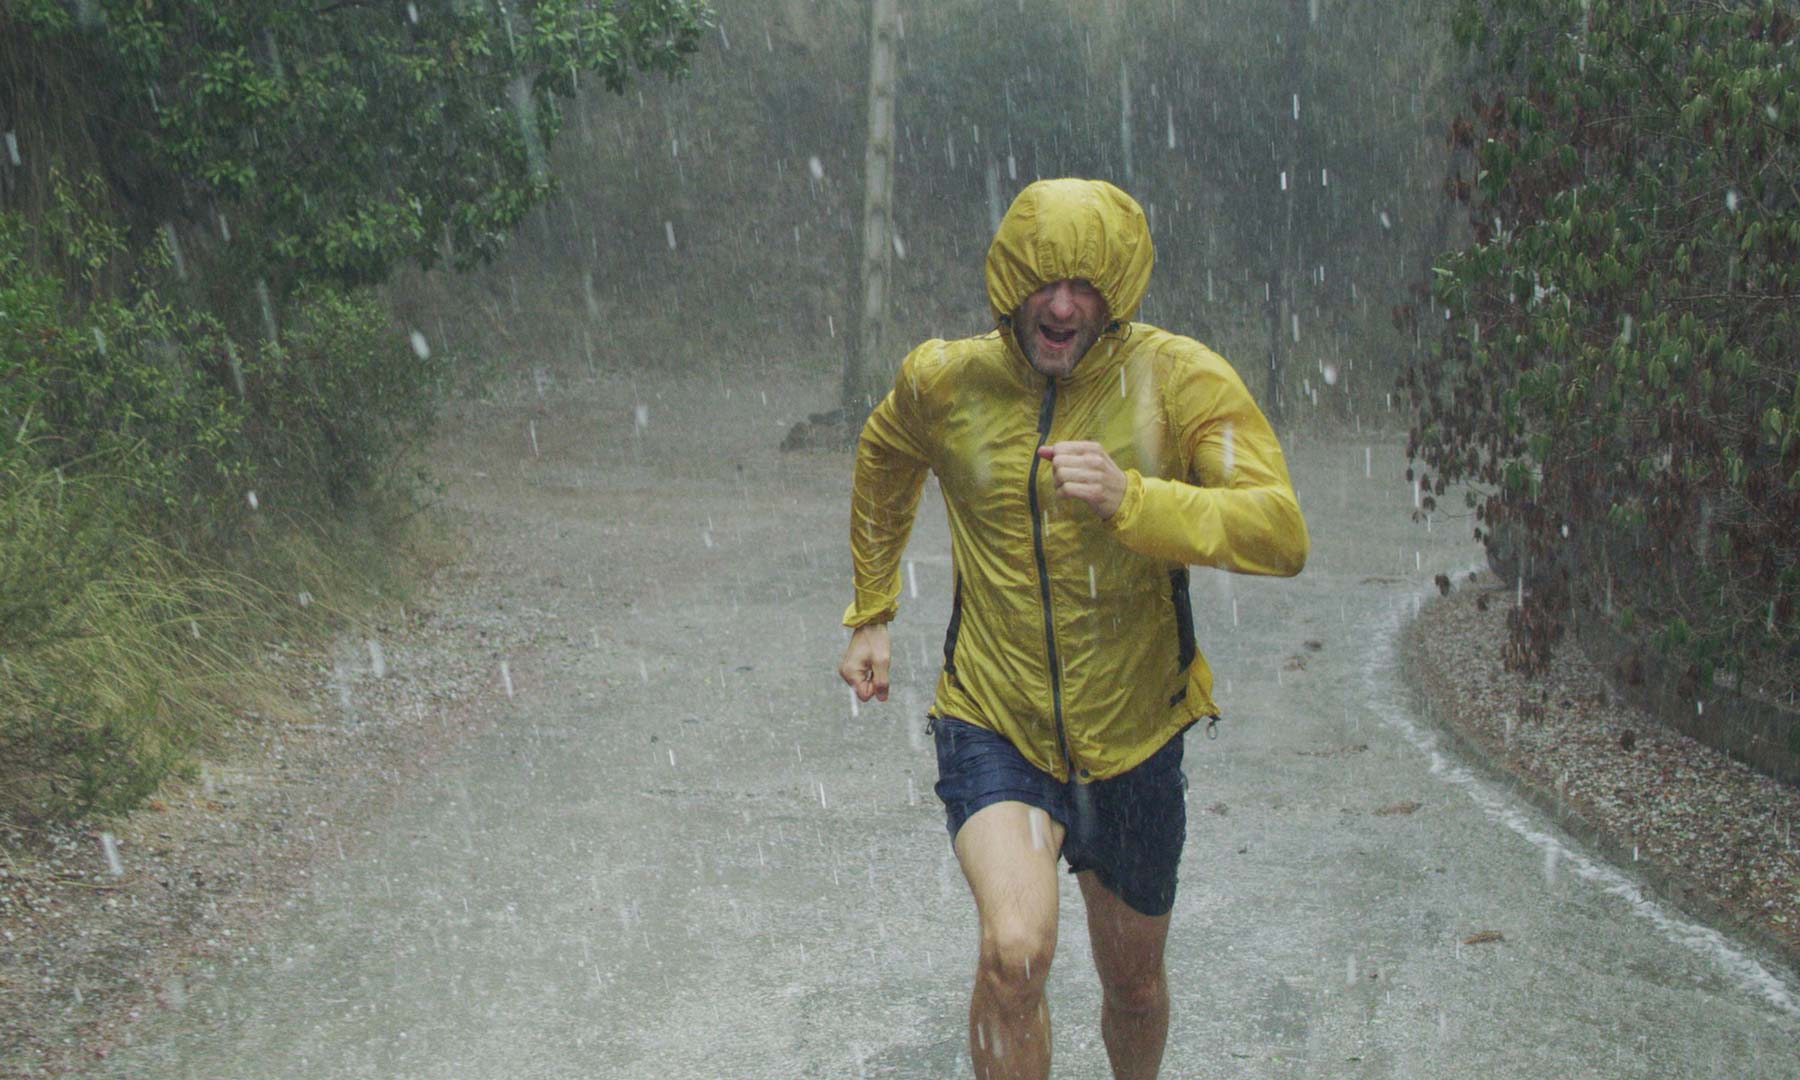 Man running in the rain with a yellow raincoat on.